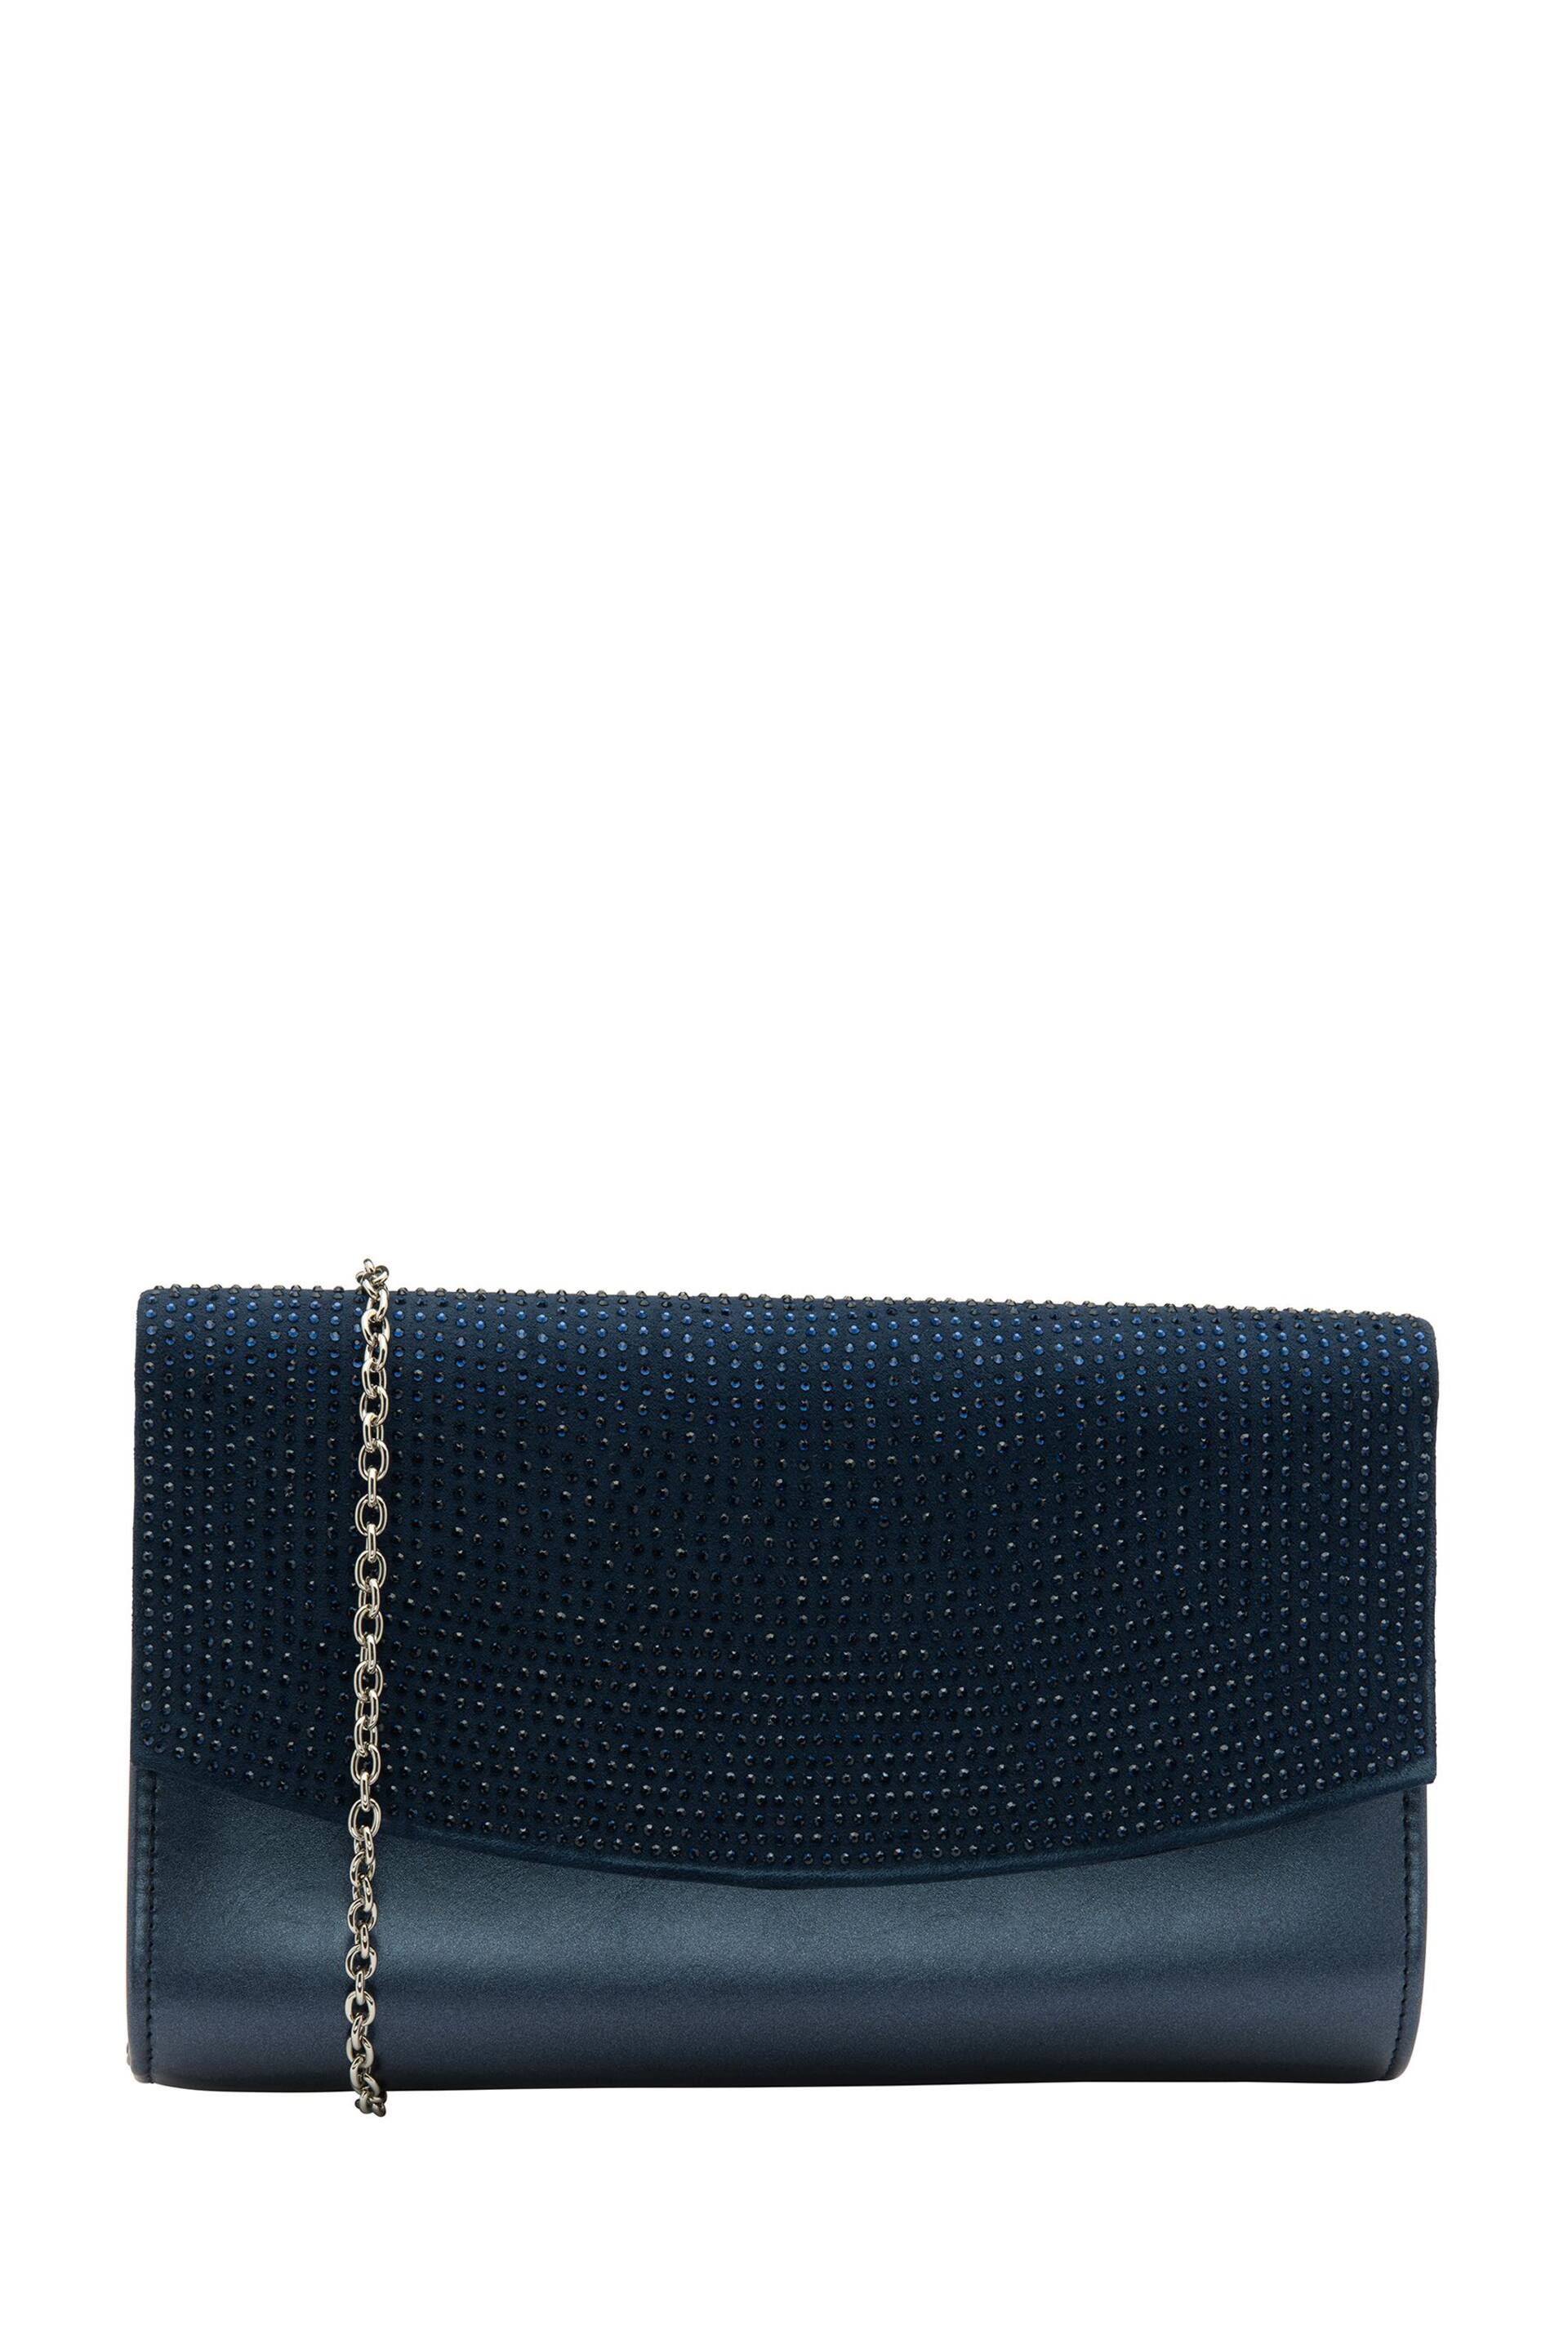 Lotus Blue Clutch Bag With Chain - Image 1 of 4